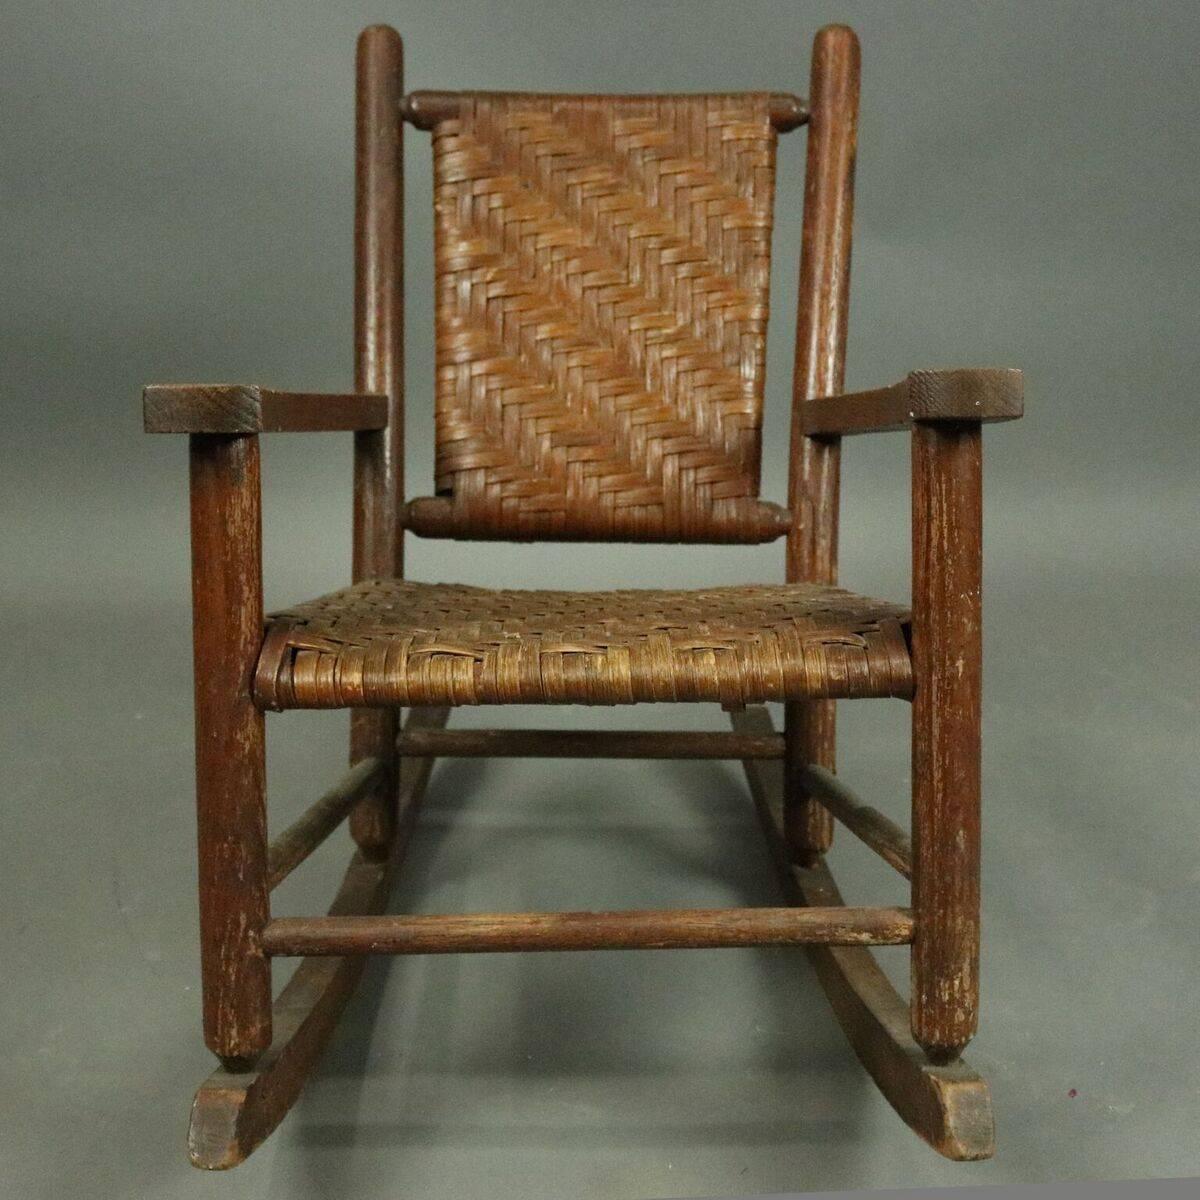 Antique old Adirondack style child's rocking chair features woven seat and back, circa 1920

Measures - 22.5" H x 16.5" W x 16" D, 12" seat height.